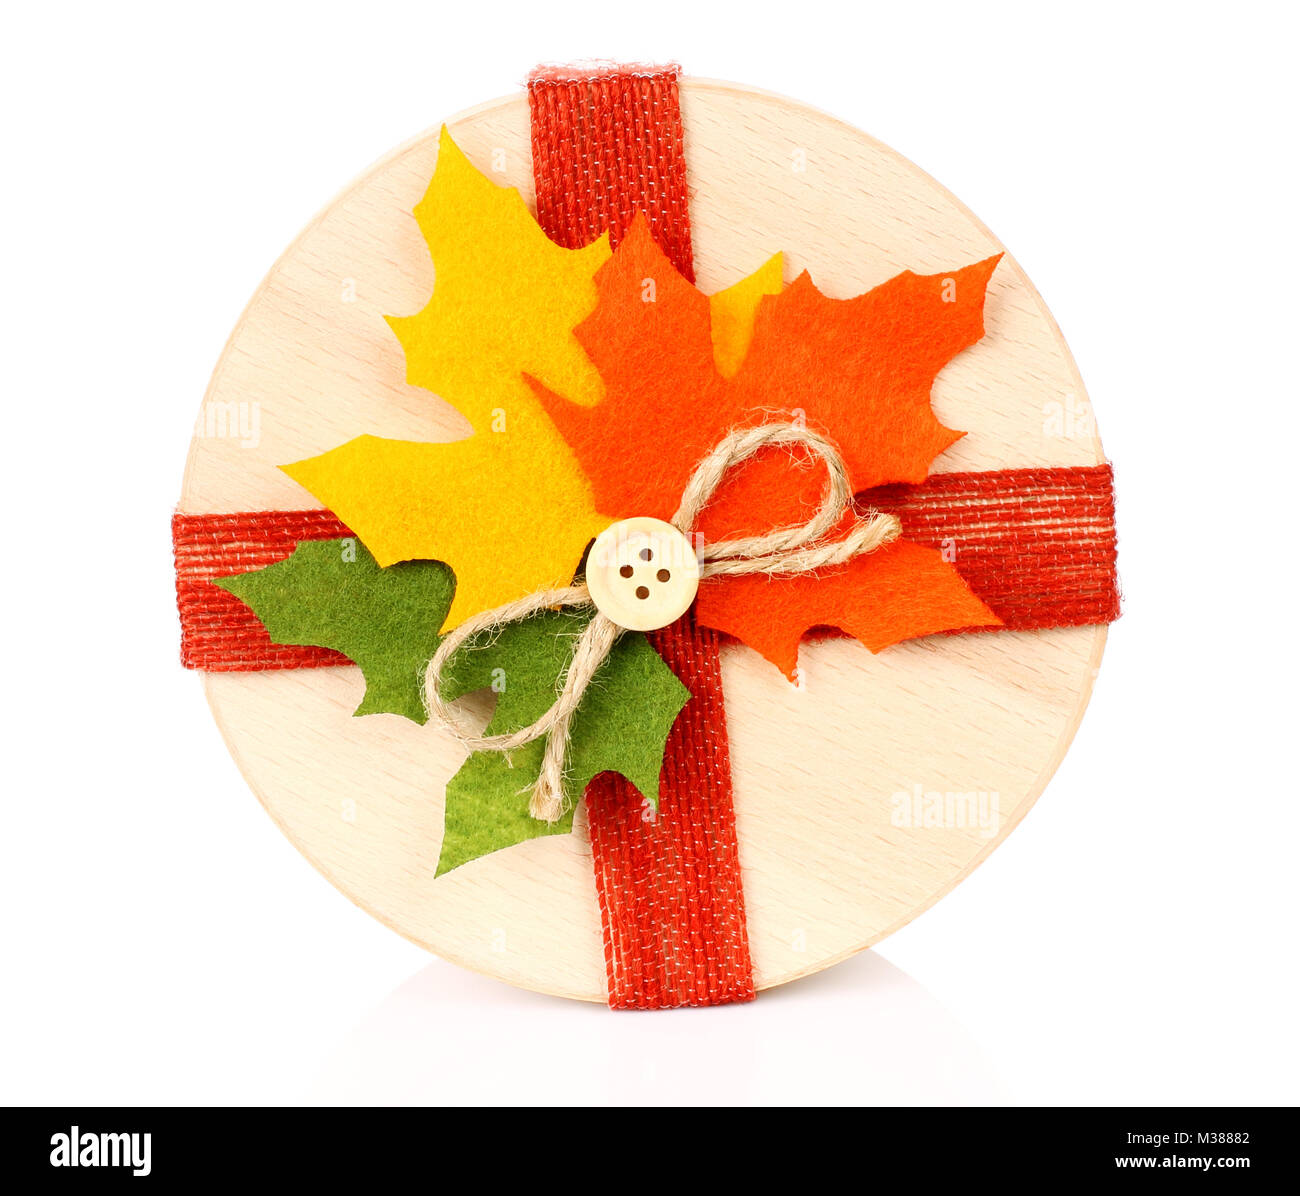 Autumn concept of present box with dried leaves on white backround Stock Photo